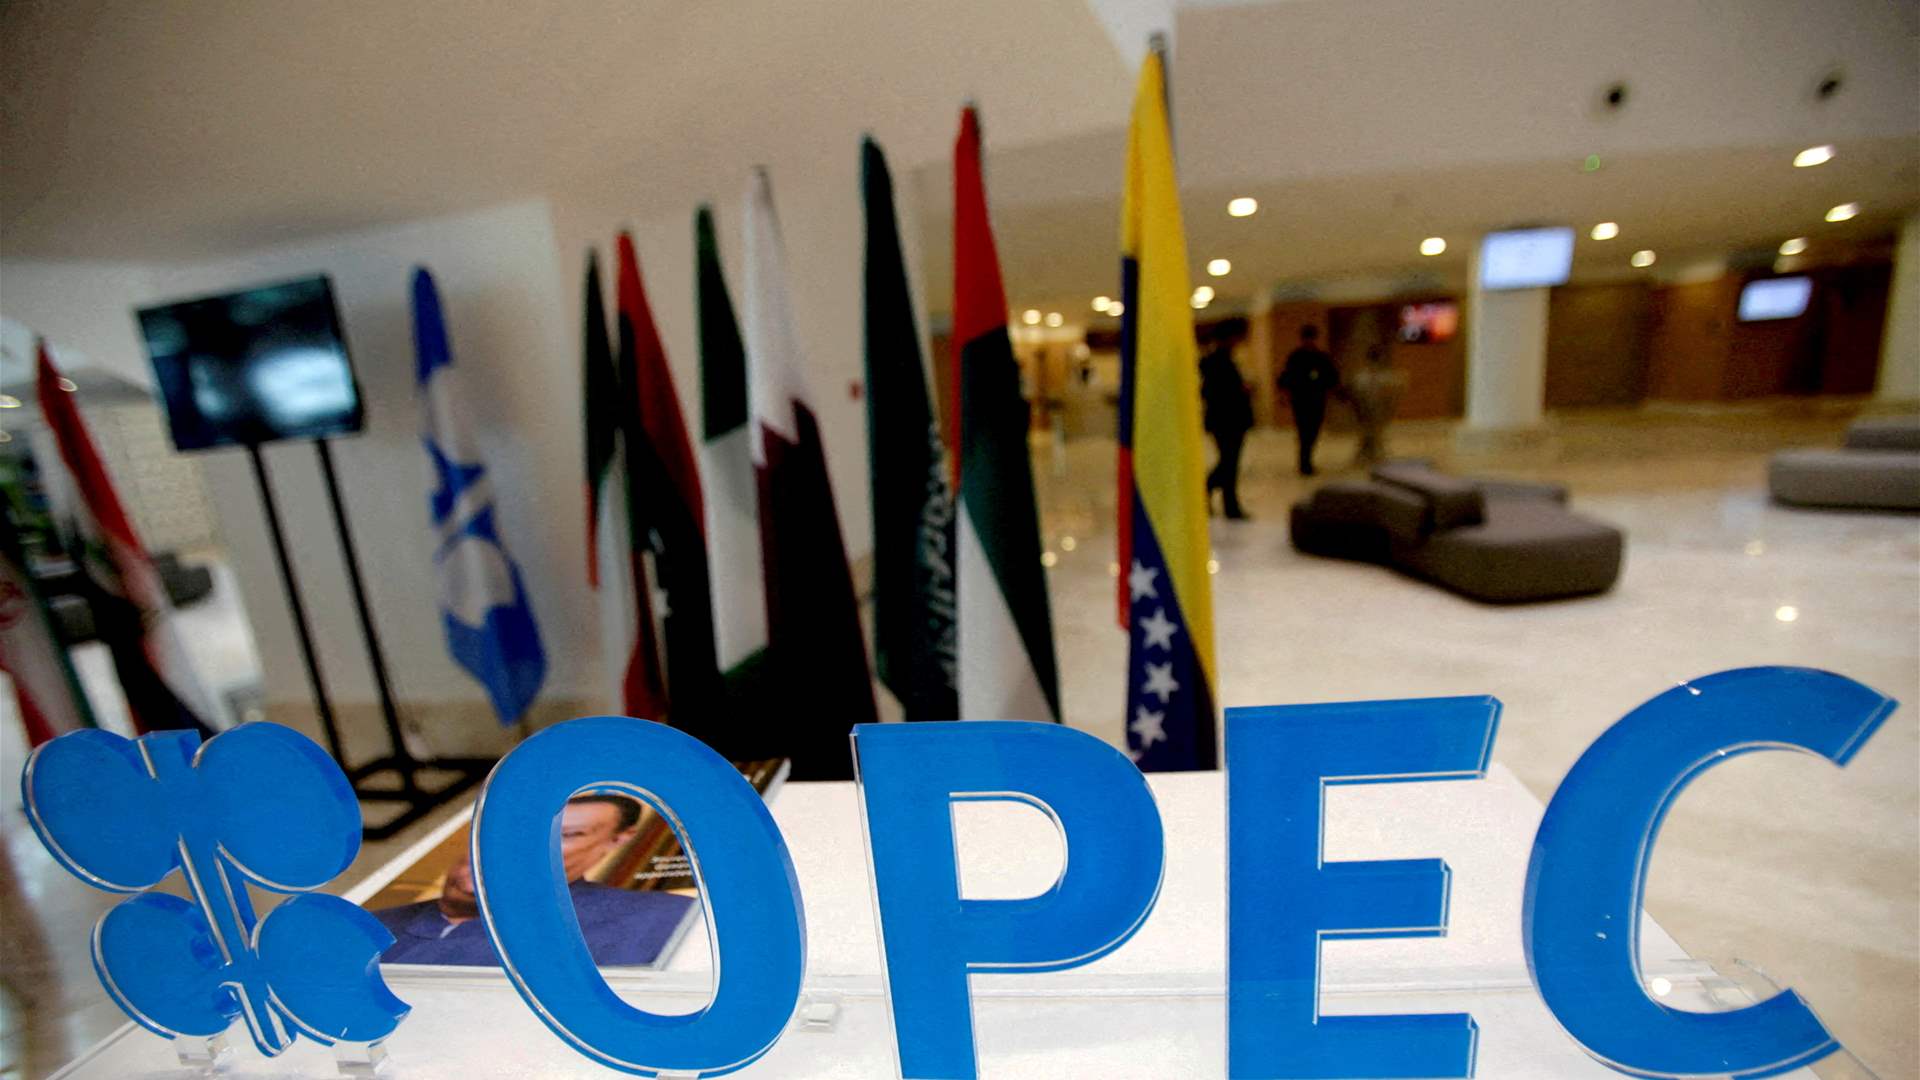 Russia: OPEC+ agreement achieves balance in energy markets